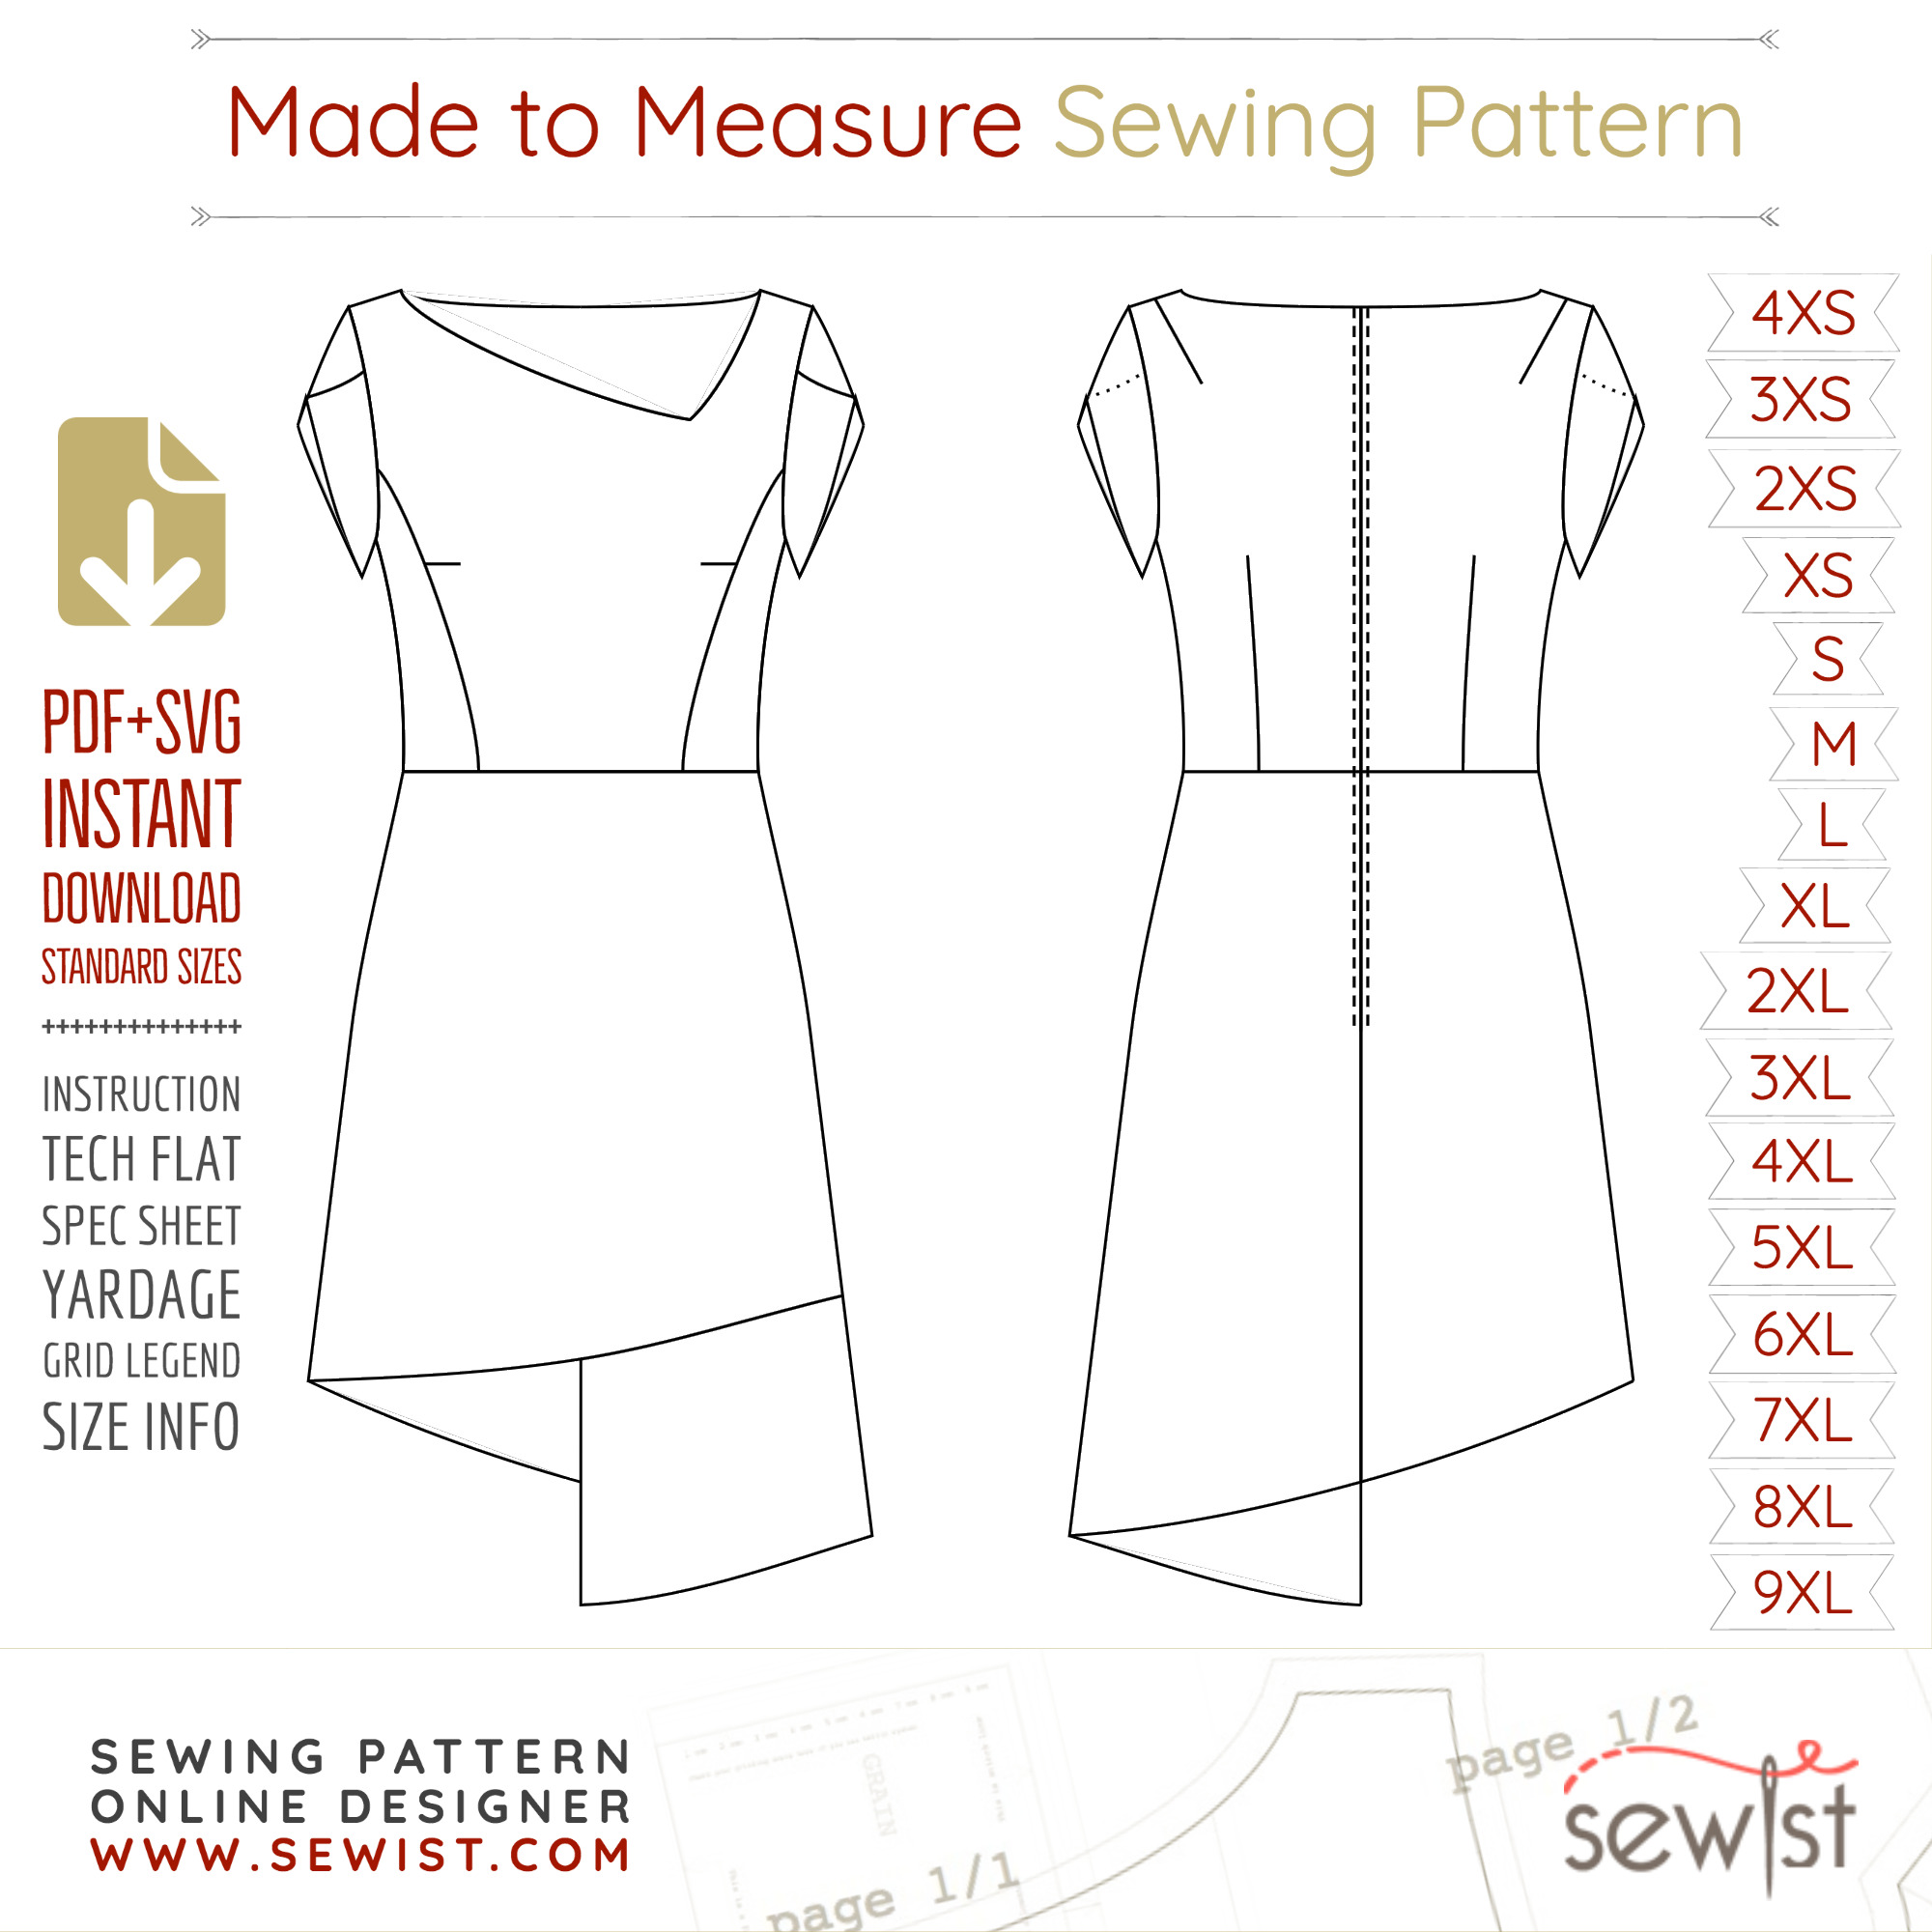 Sewist 1759277 - Sewing Pattern #1759277. Made-to-measure sewing ...